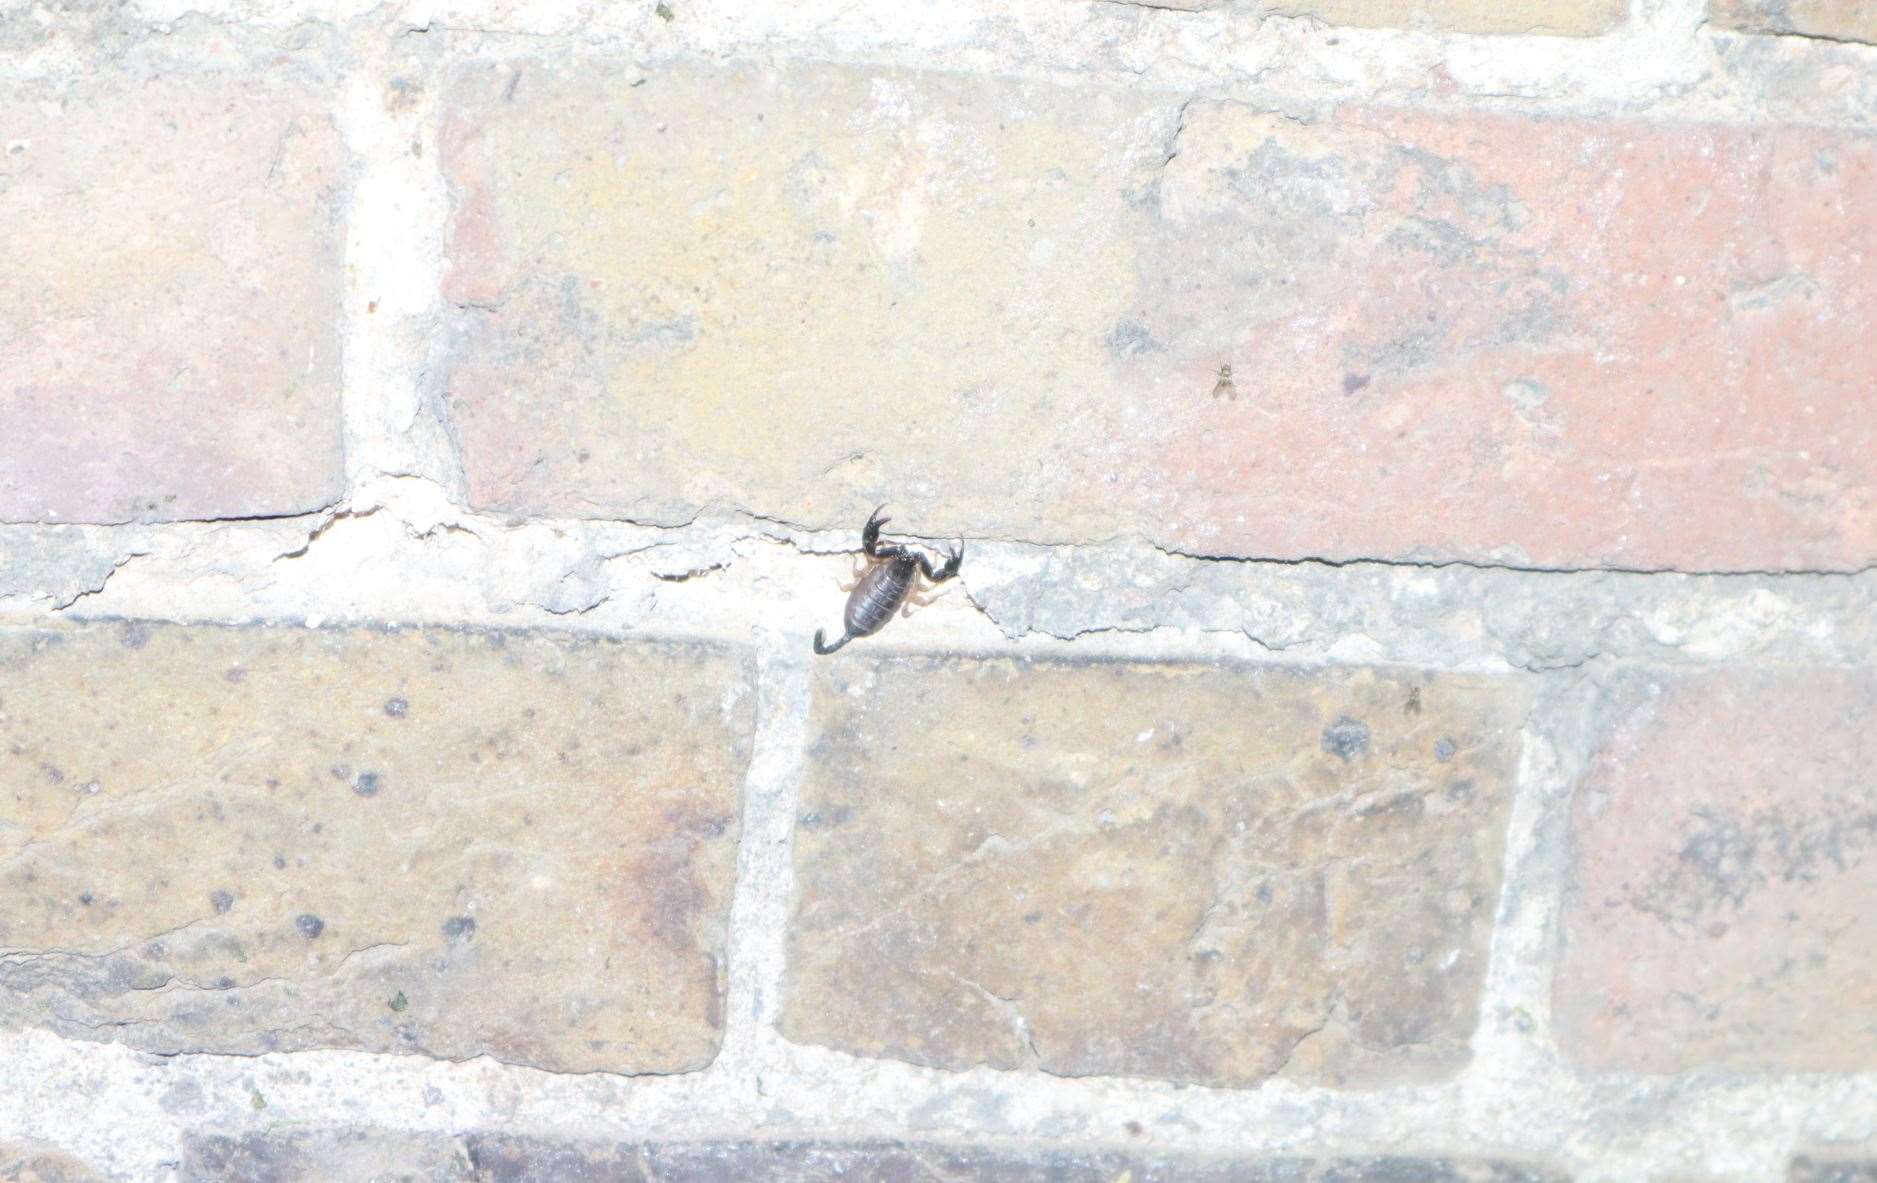 Scorpion caught by camera flash at Blue Town, Sheerness. Picture: John Nurden